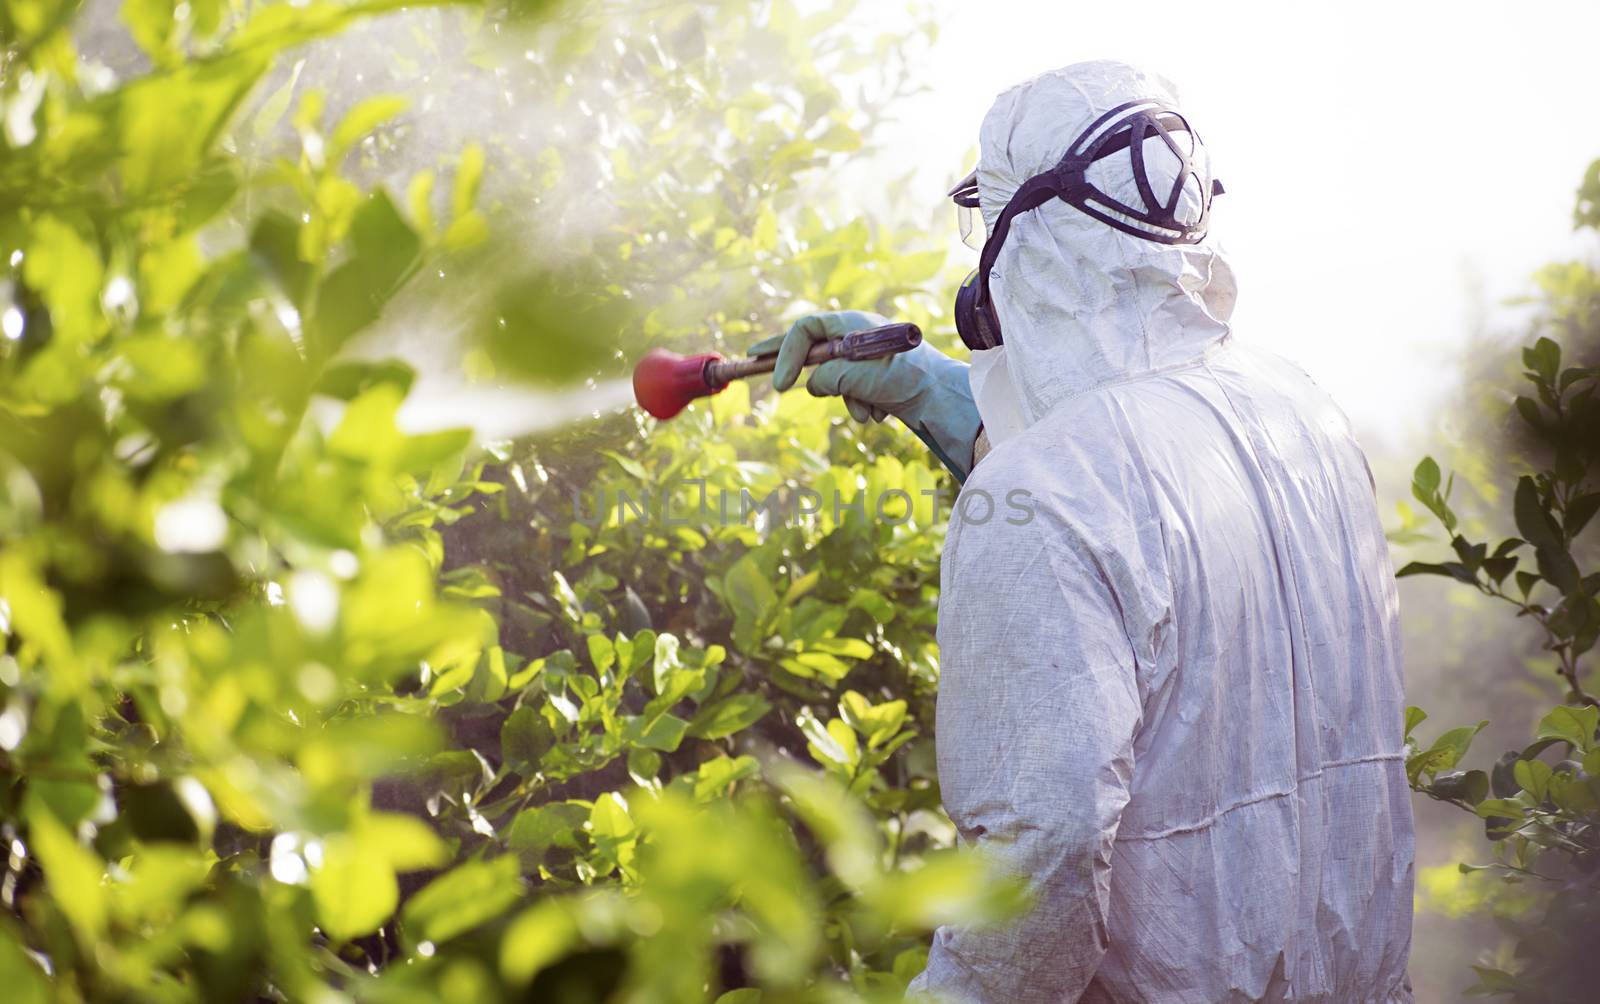 A worker wearing protective clothes fumigates a plantation of lemon trees in Spain